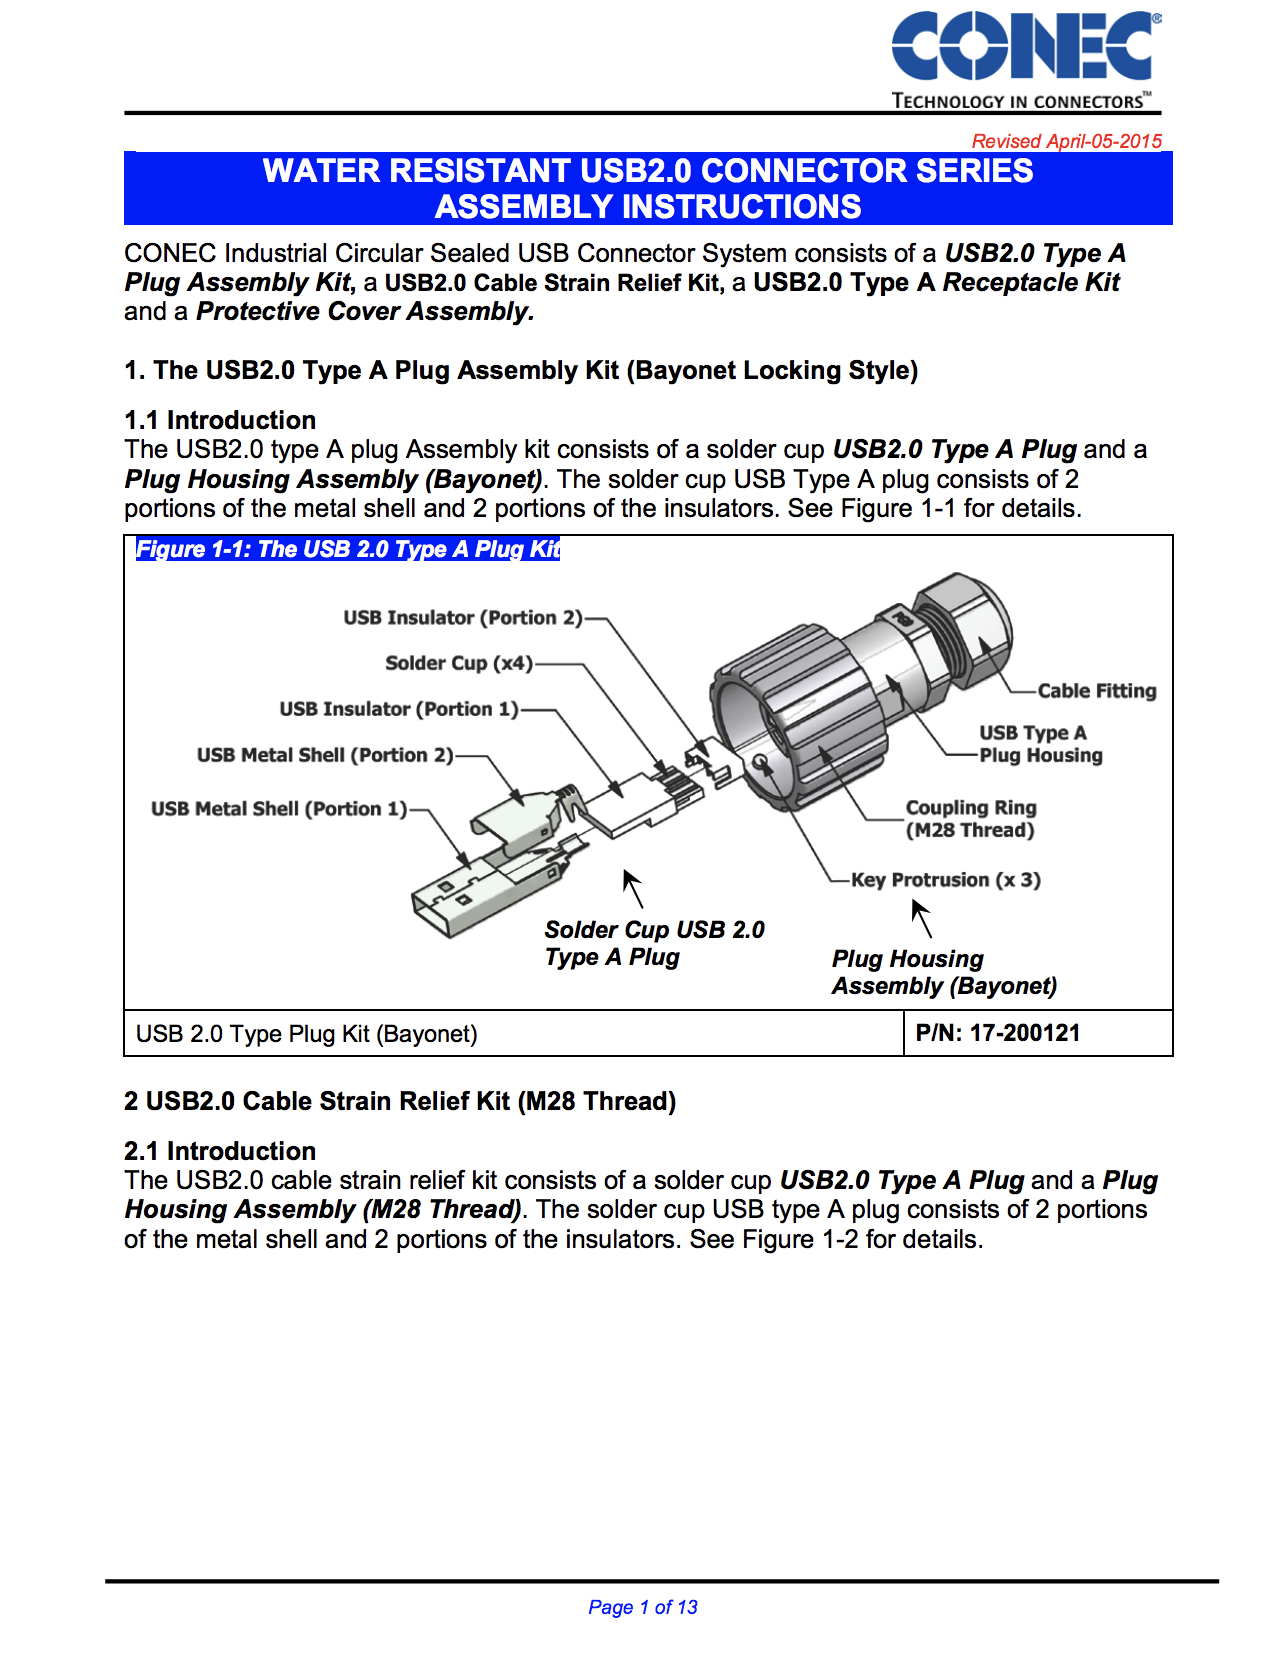 Conec IP67 USB2.0 Connector Series Assembly Instructions